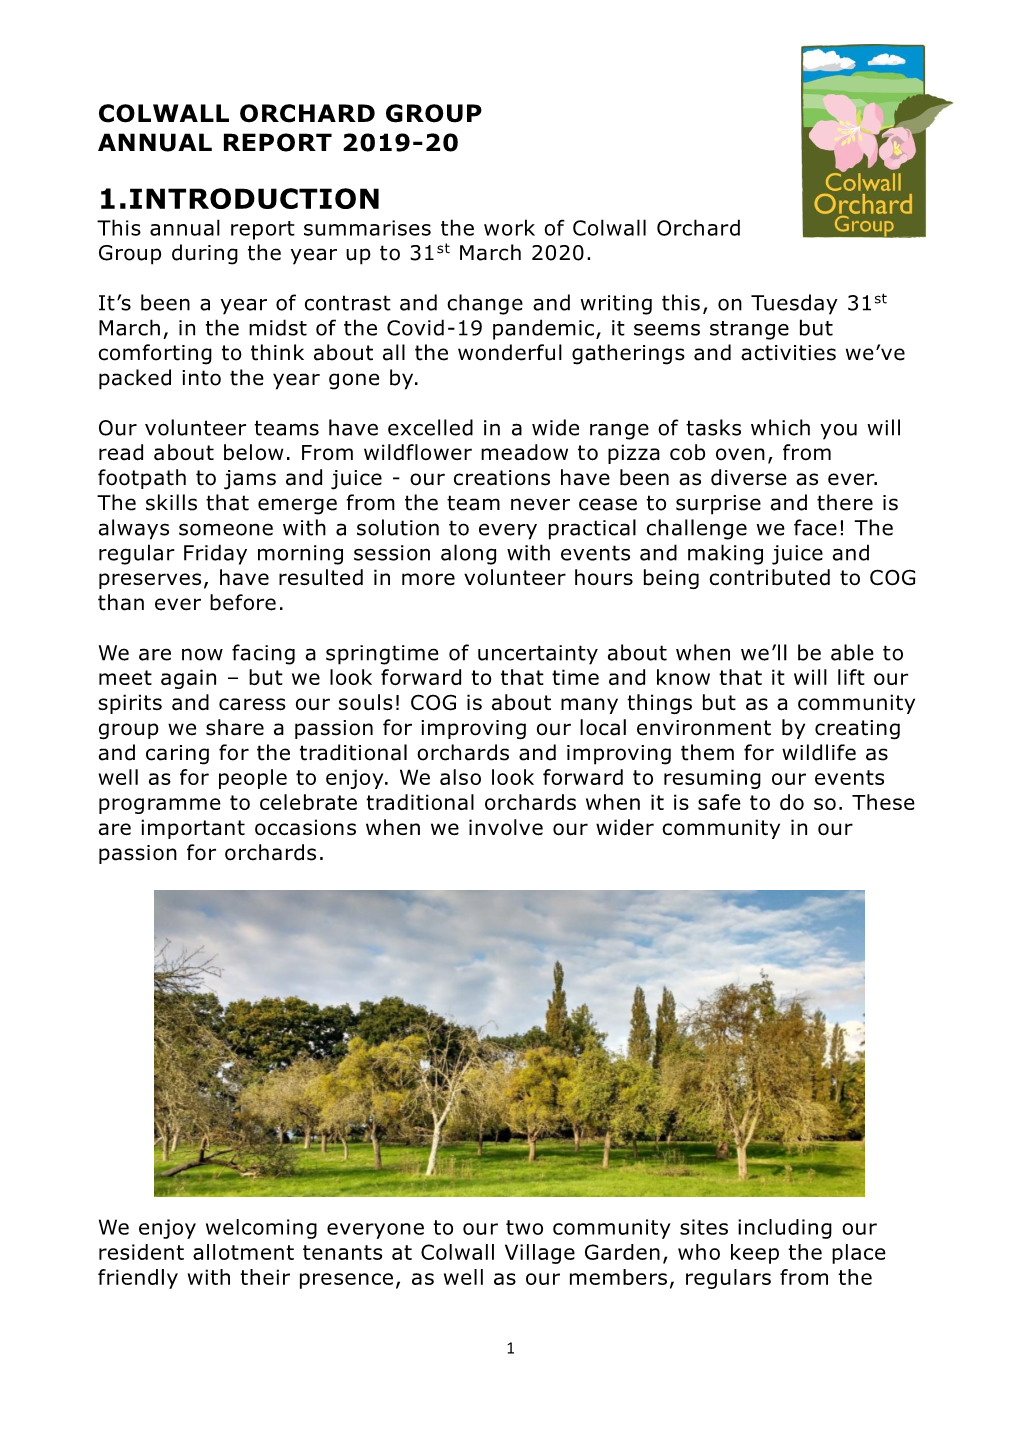 1. INTRODUCTION This Annual Report Summarises the Work of Colwall Orchard Group During the Year up to 31St March 2020